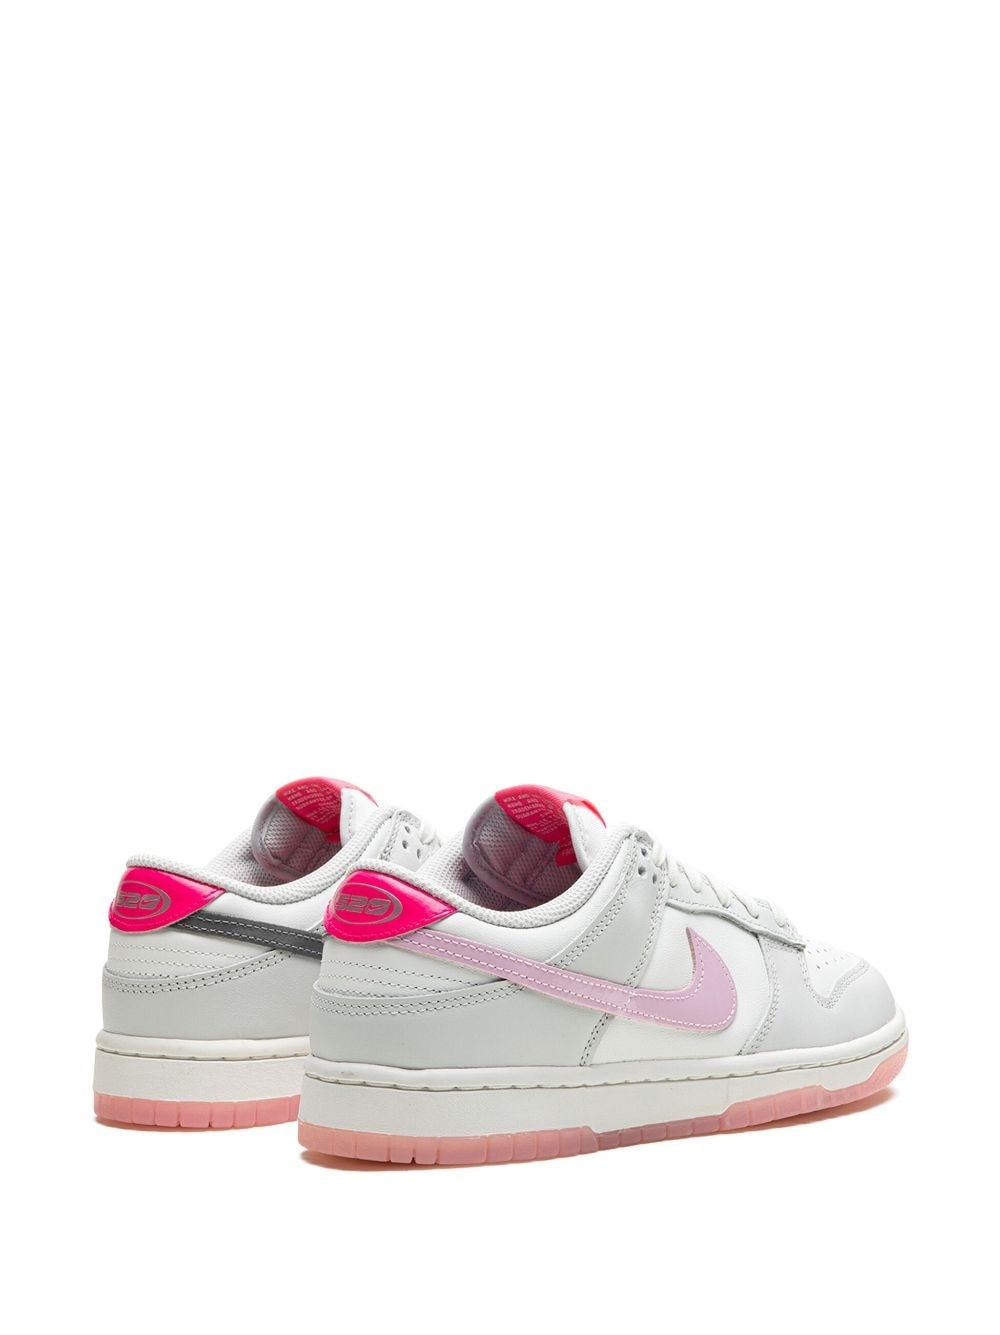 Dunk Low "520 Pack Pink" sneakers - 3